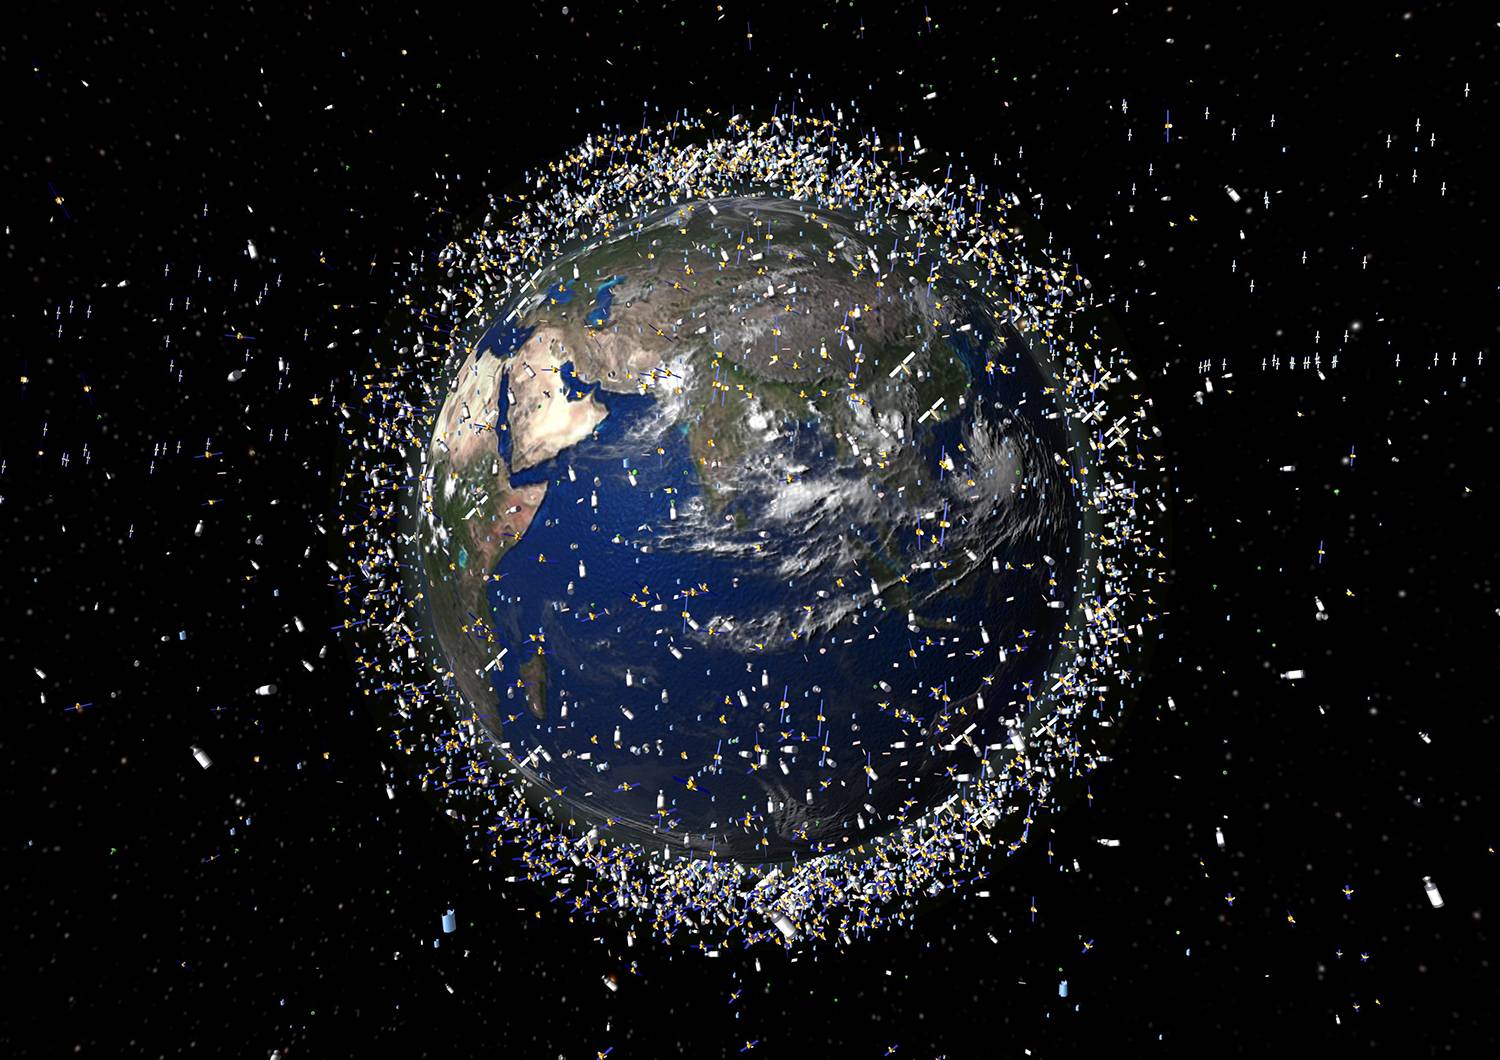 Two large chunks of space junk collided with Earth - BGR

